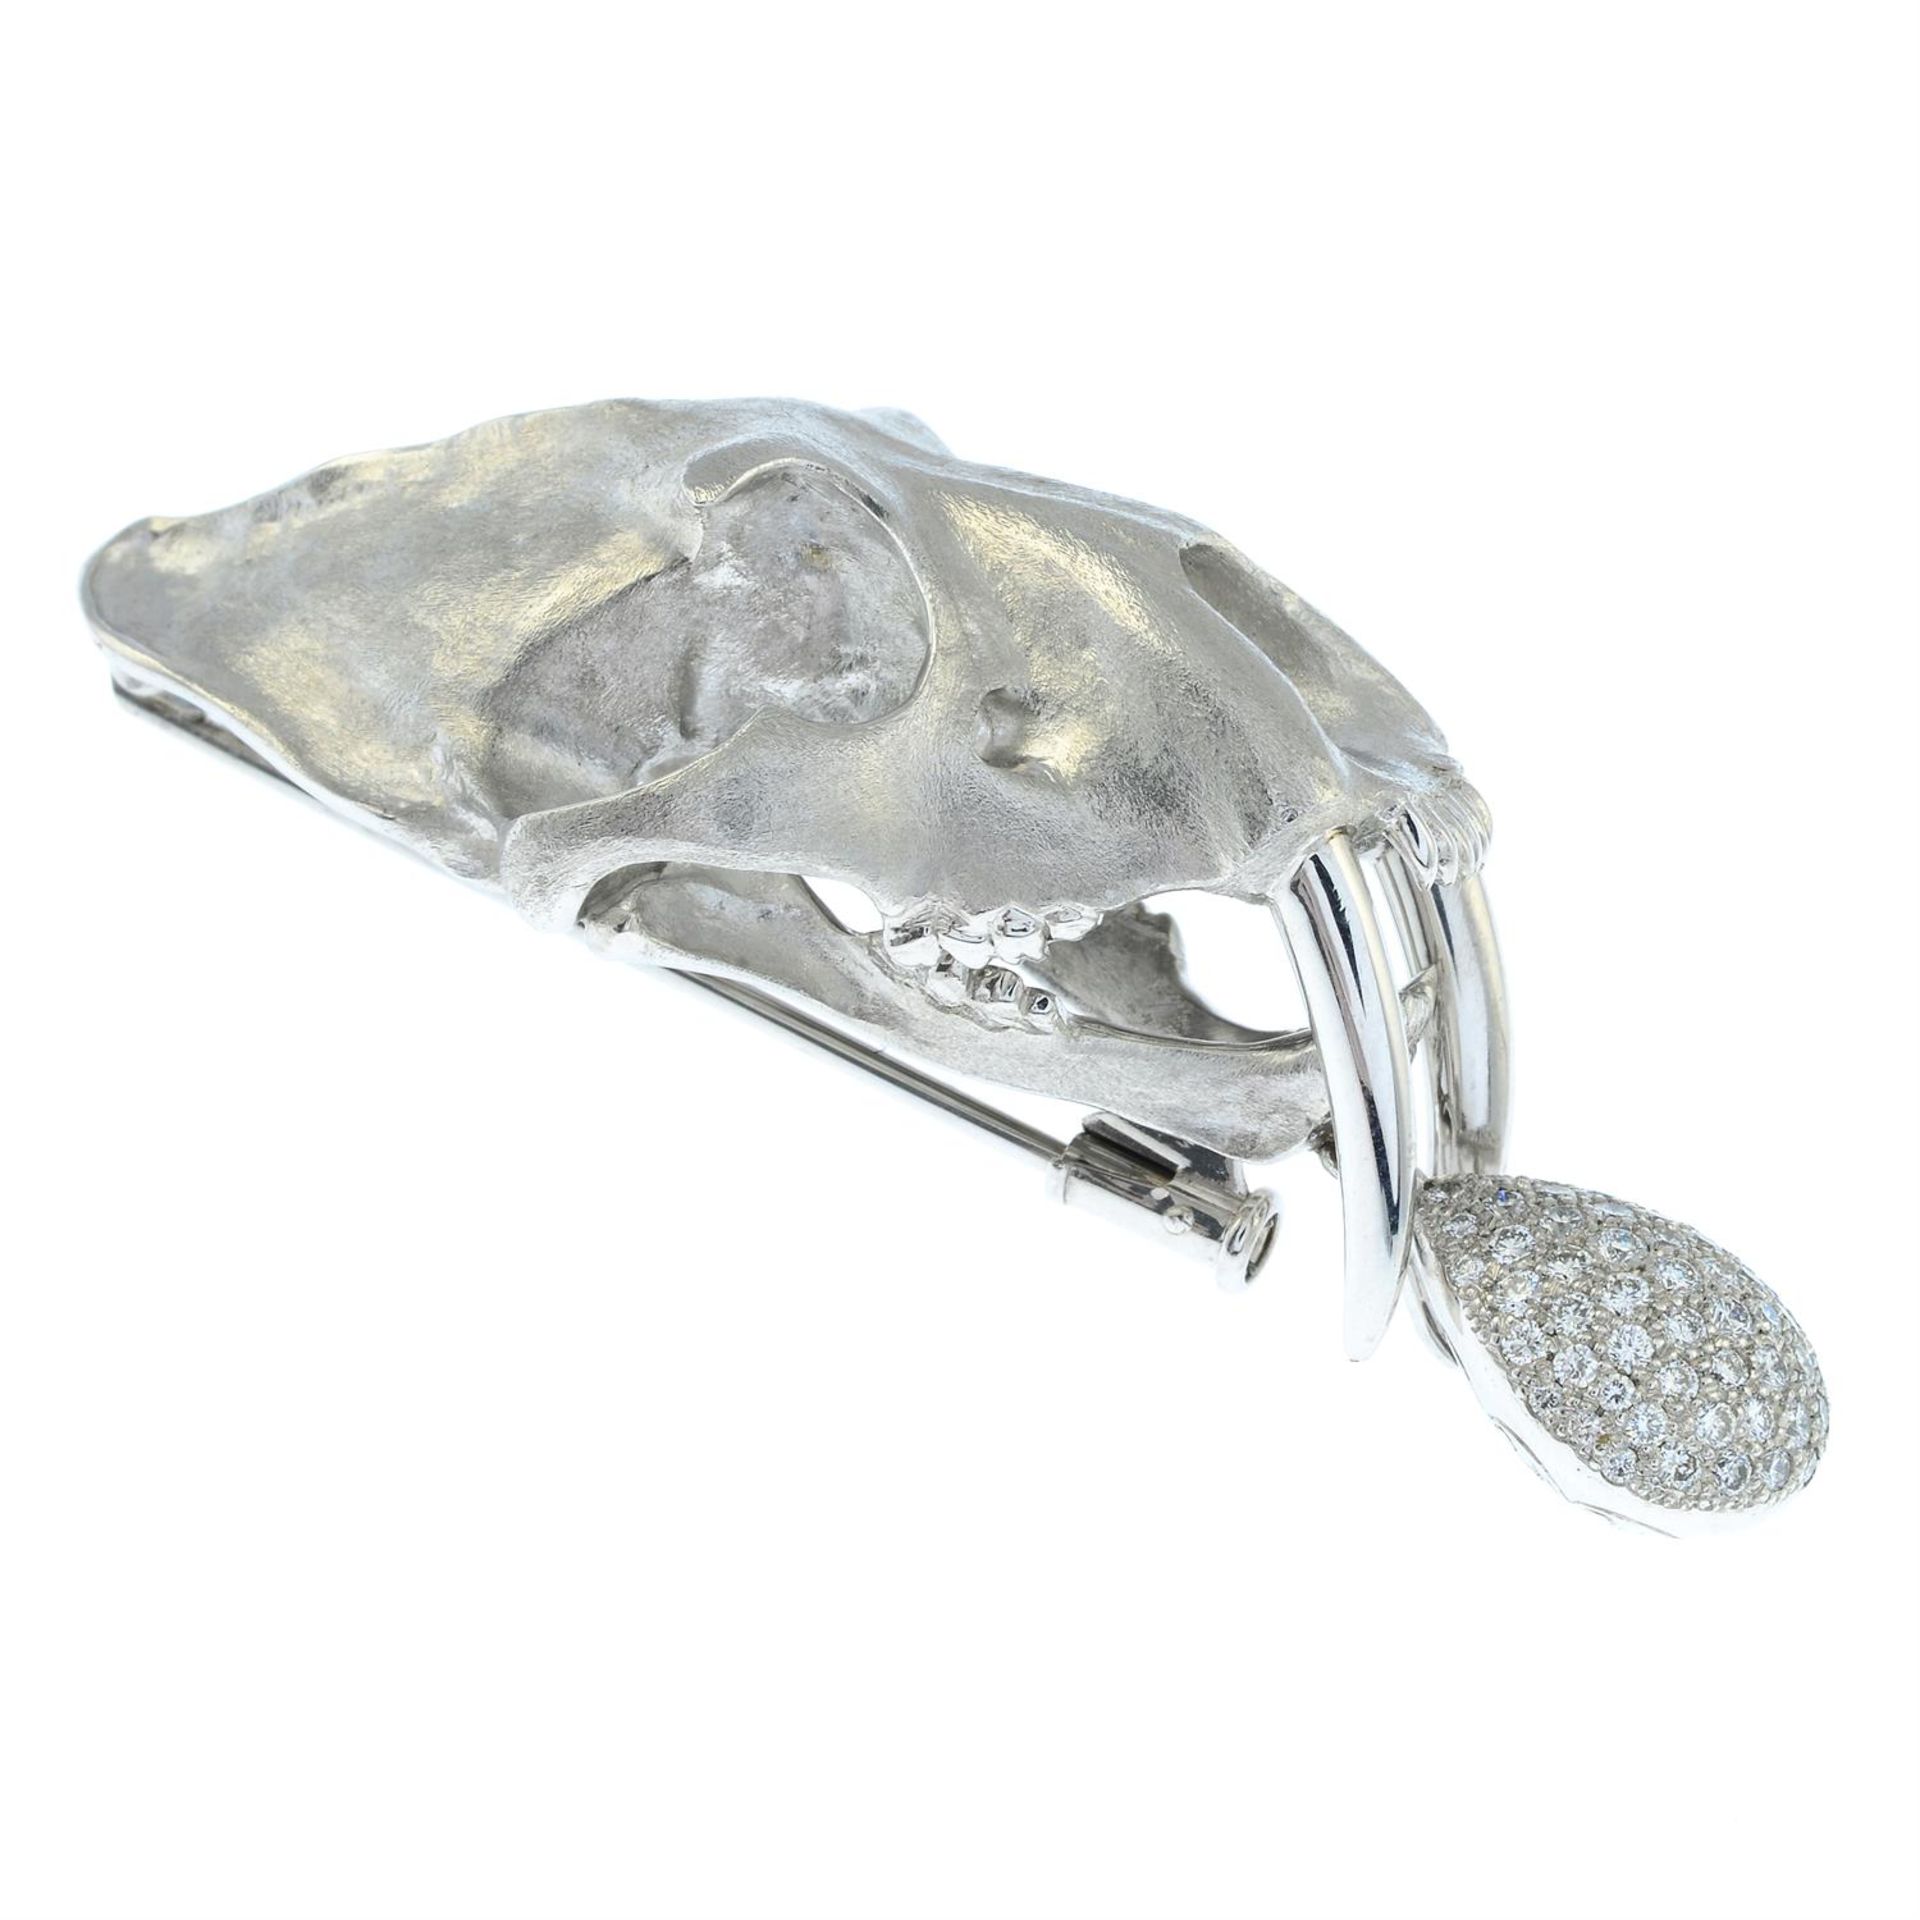 An 18ct gold animal skull brooch, with pavé-set diamond egg drop, by E. Wolfe & Co. - Image 3 of 5